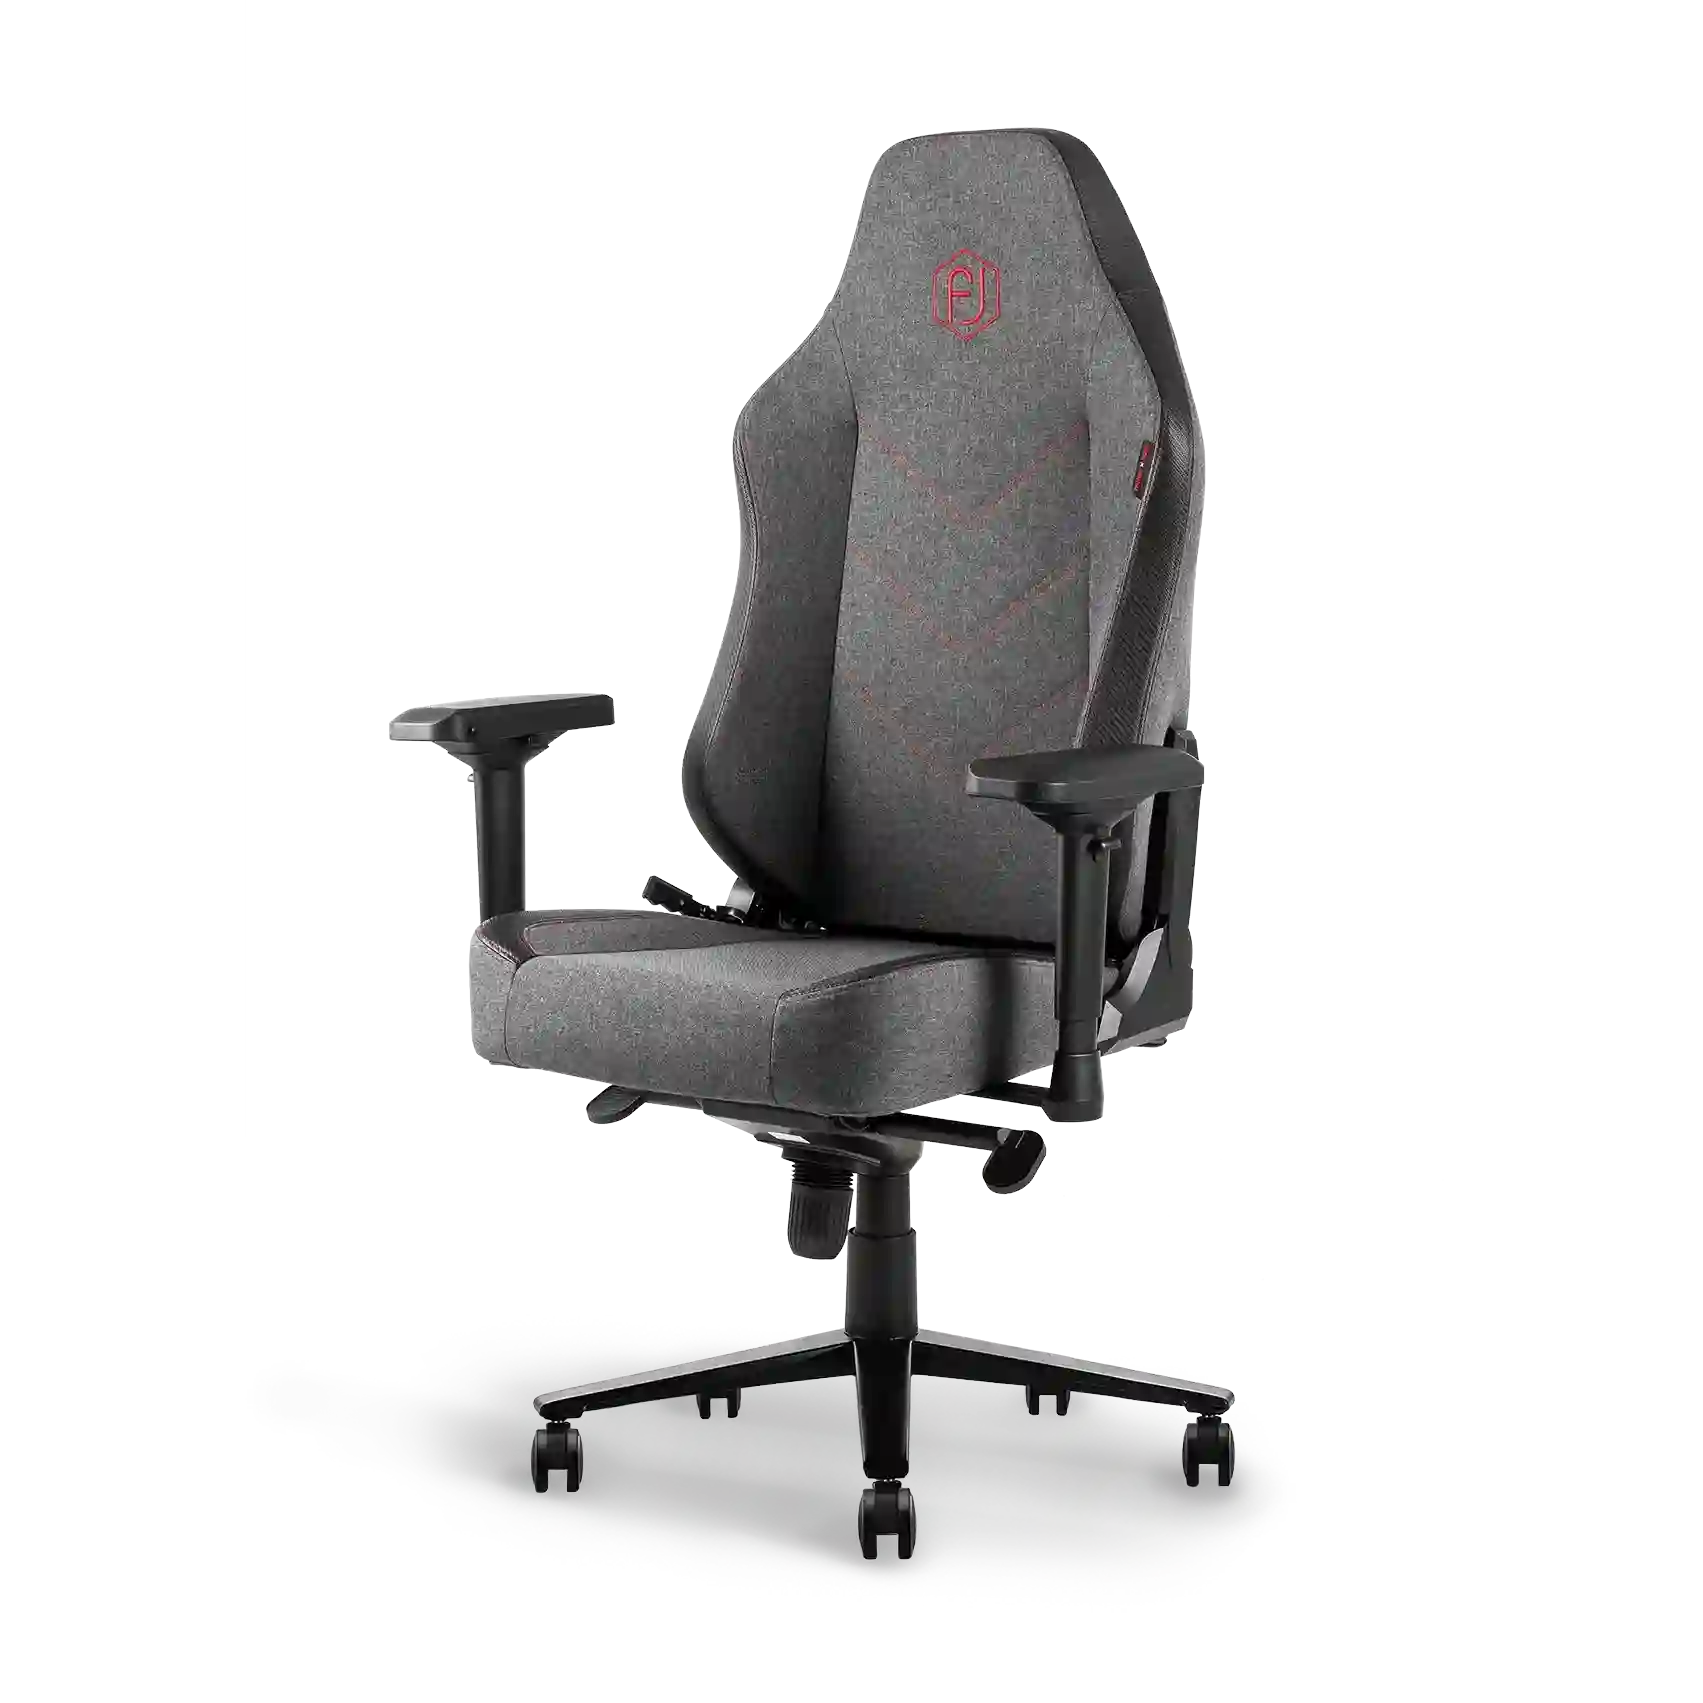 Heather grey ergonomic gaming chair with embroidered logo and adjustable armrests, front view.